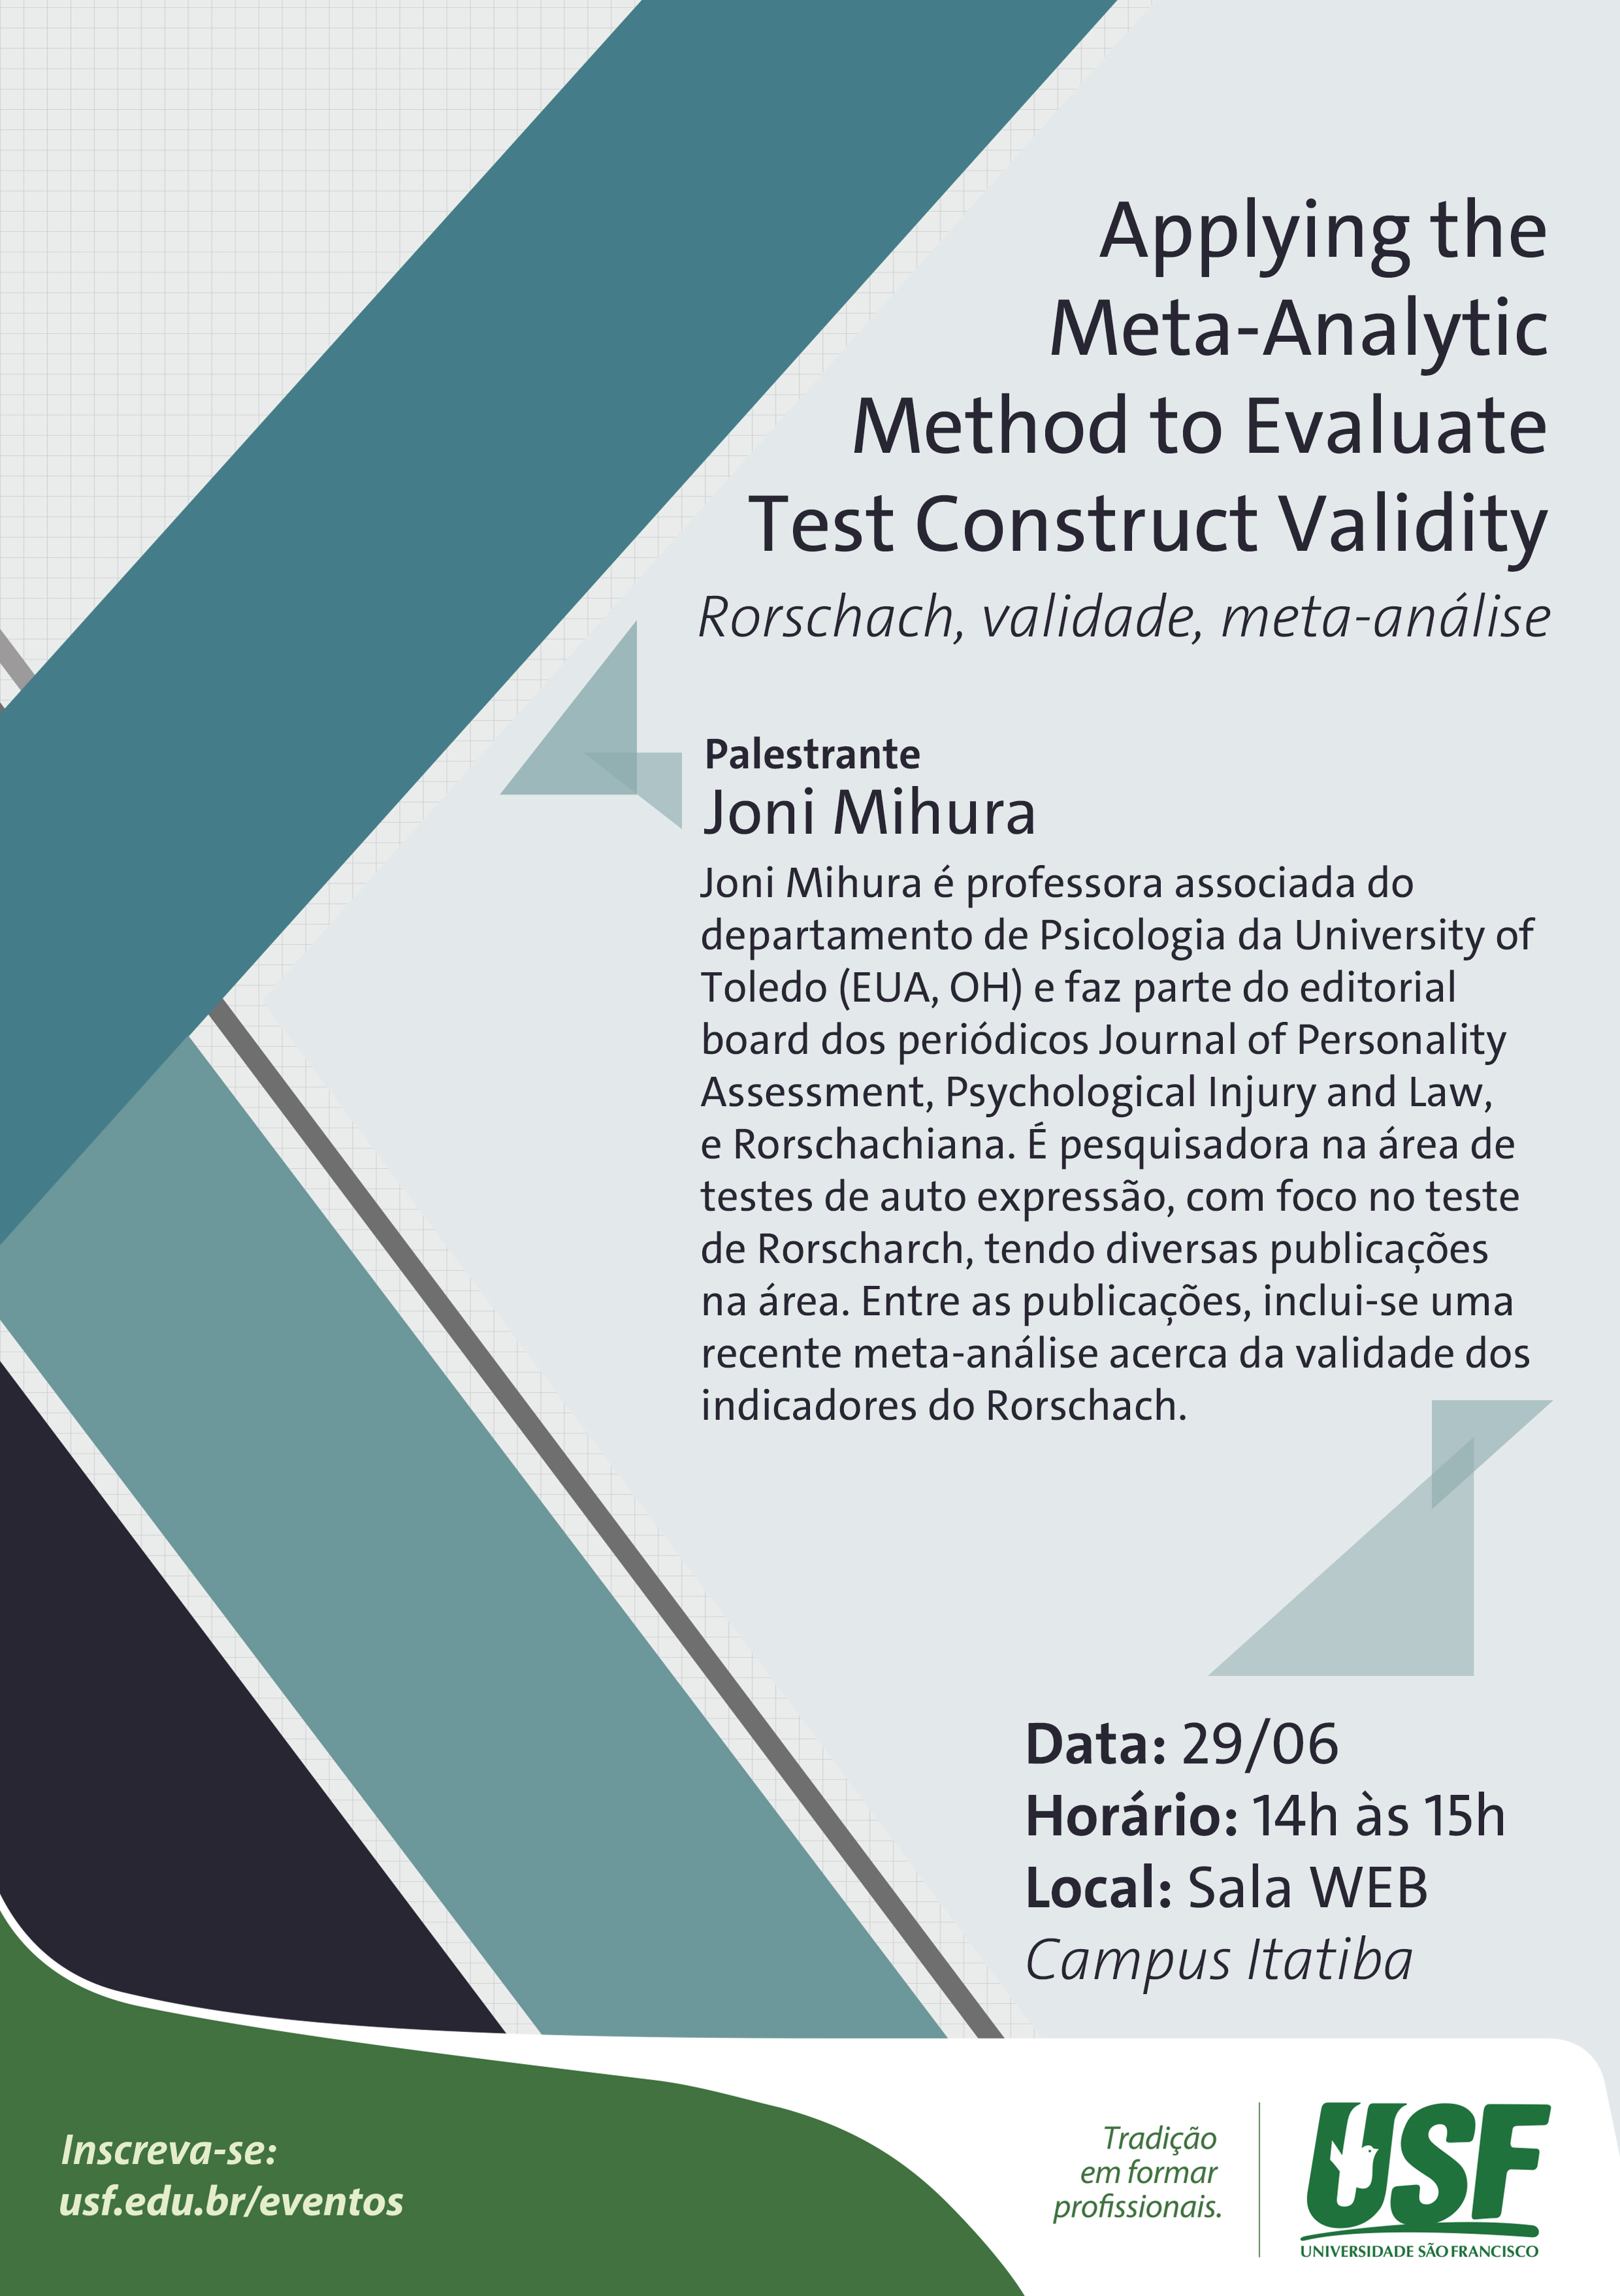 Applying the Meta-Analytic Method to Evaluate Test Construct Validity